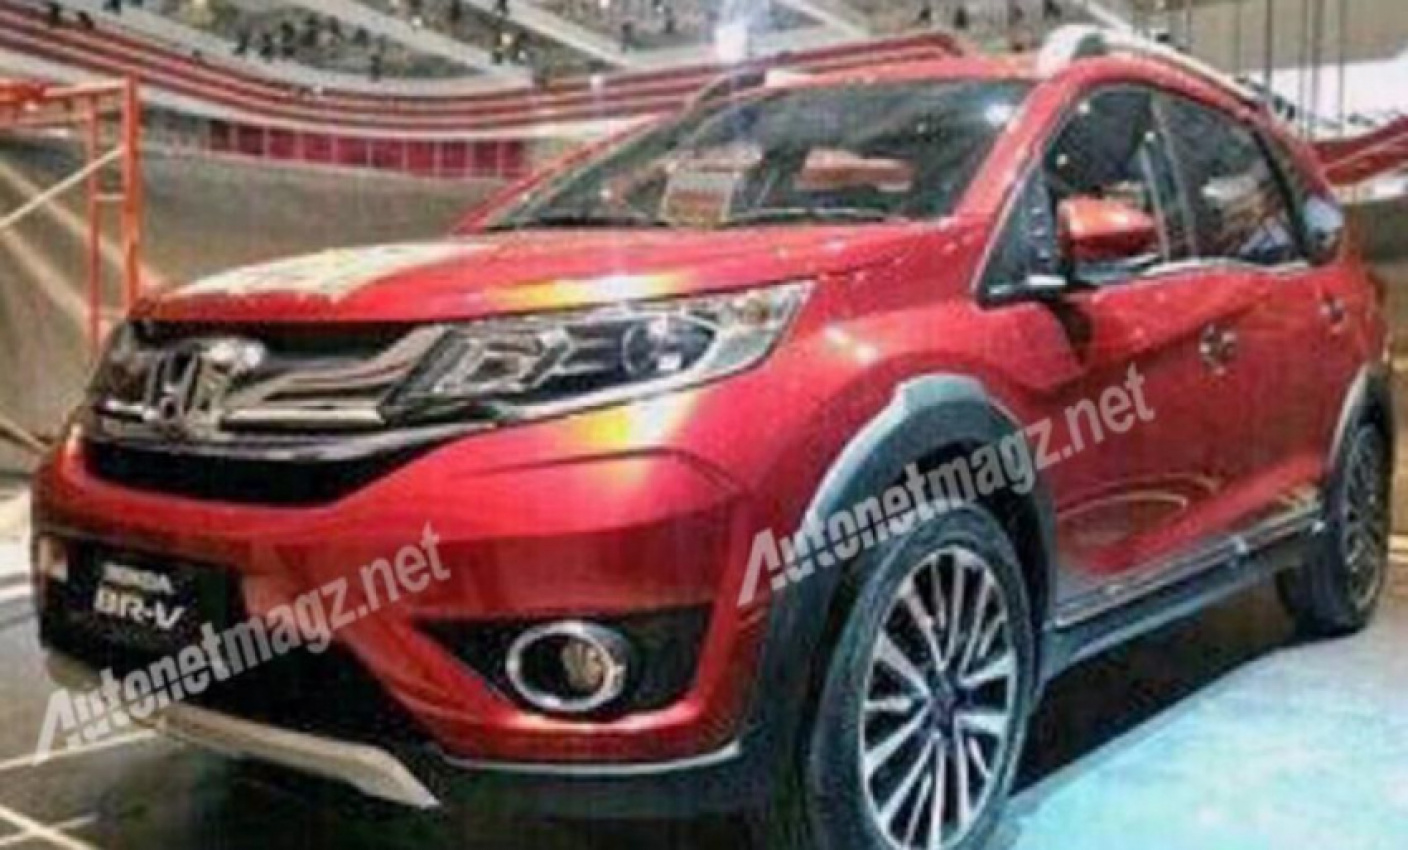 autos, cars, honda, 2015 honda br-v, auto news, br-v, cr-v, honda br-v, honda malaysia, hr-c, giias 2015: honda br-v opens for booking august 20th, in indonesia